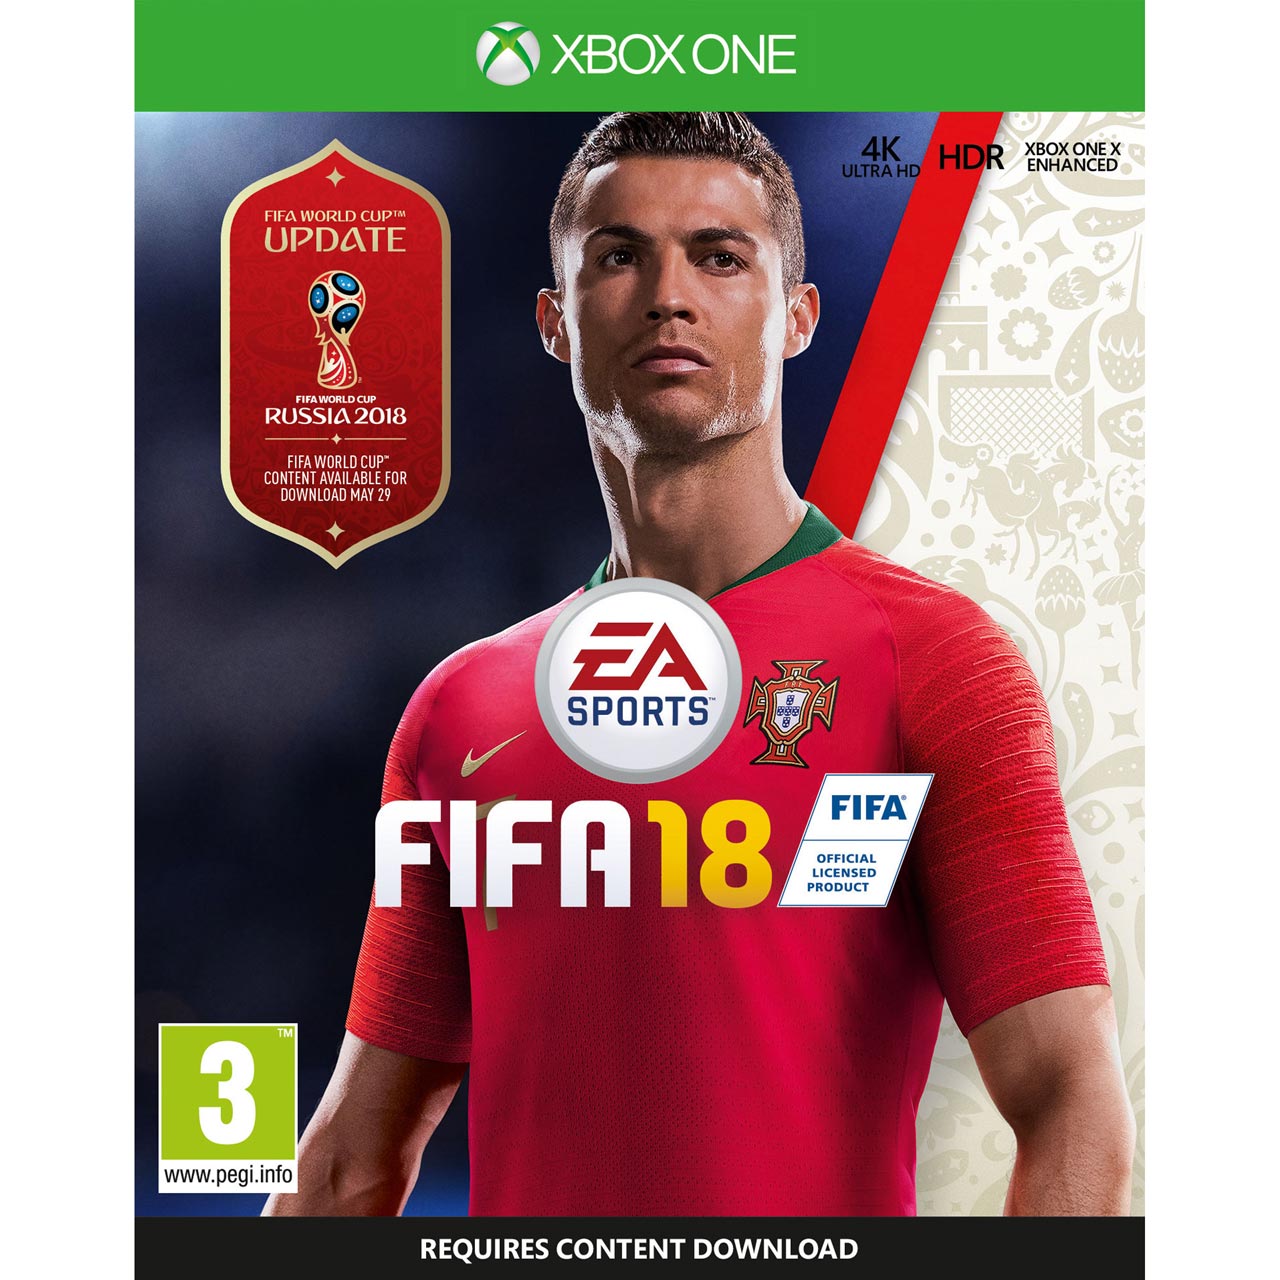 FIFA 18 for Xbox One Review